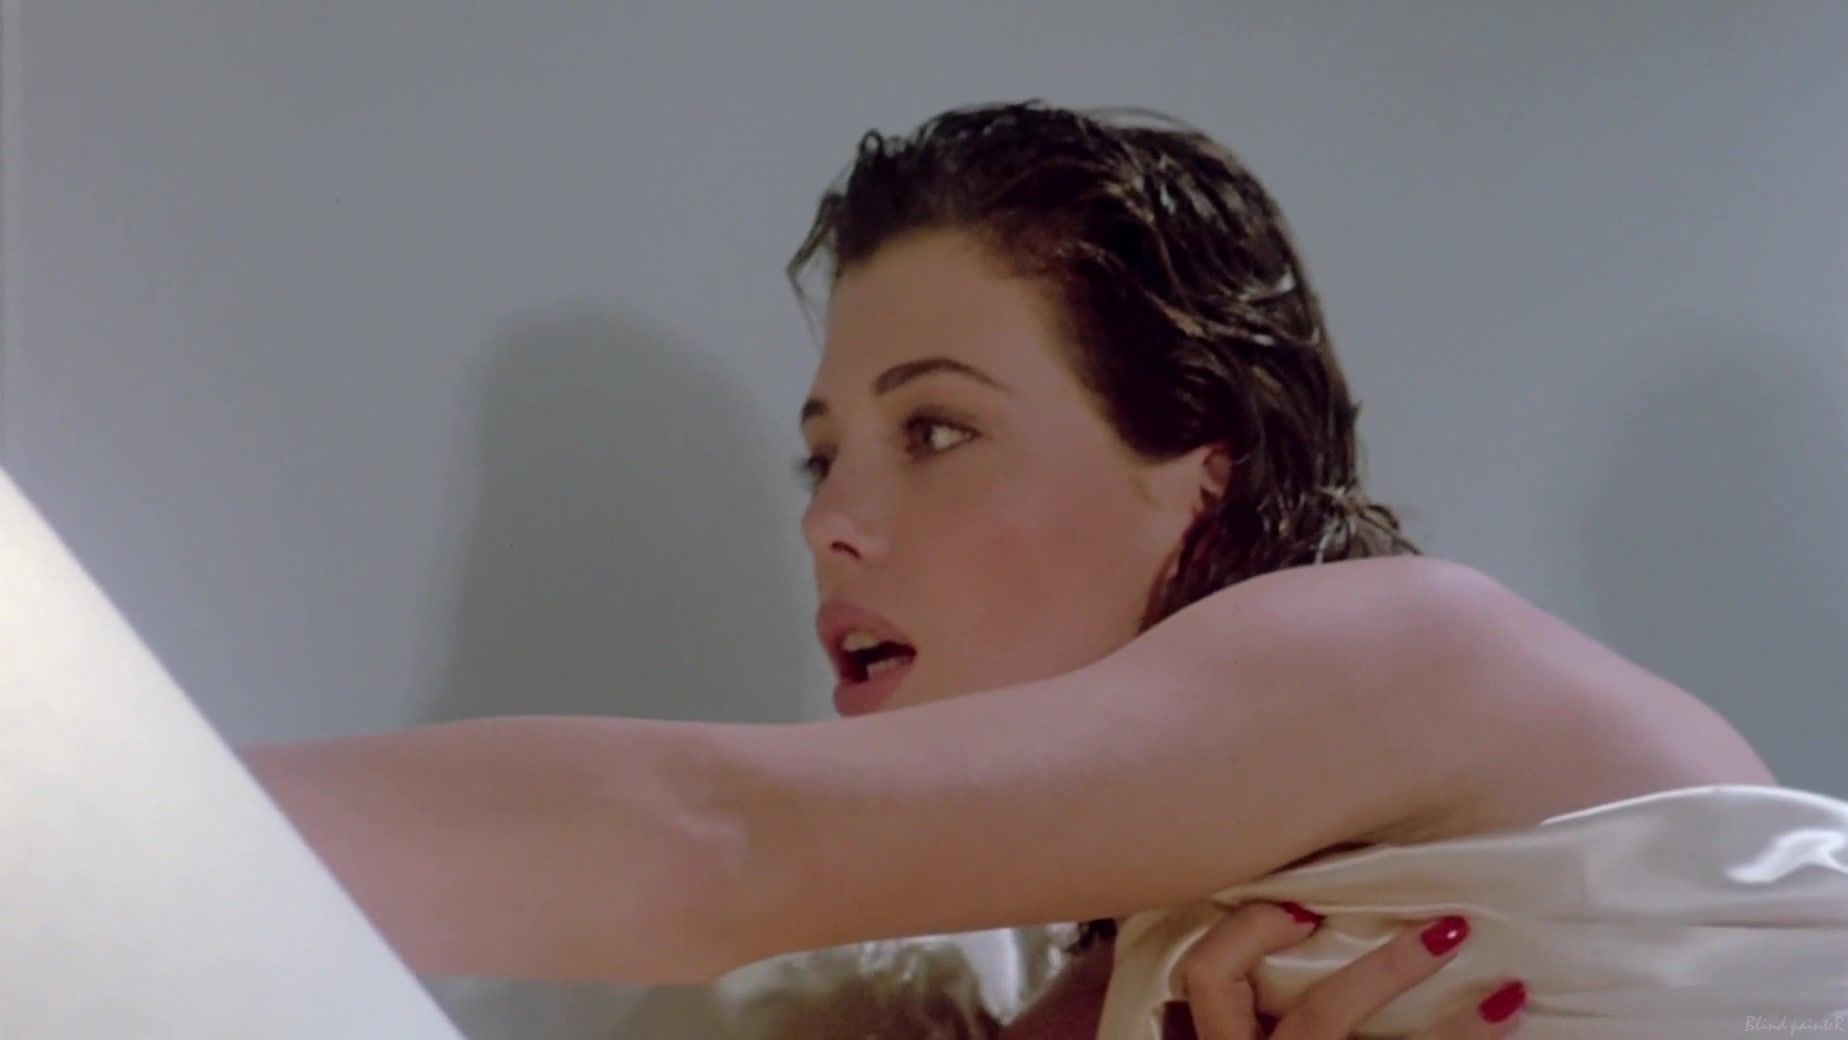 Sucking Cocks Kelly LeBrock nude - The Woman in Red (1984) Shoes - 1